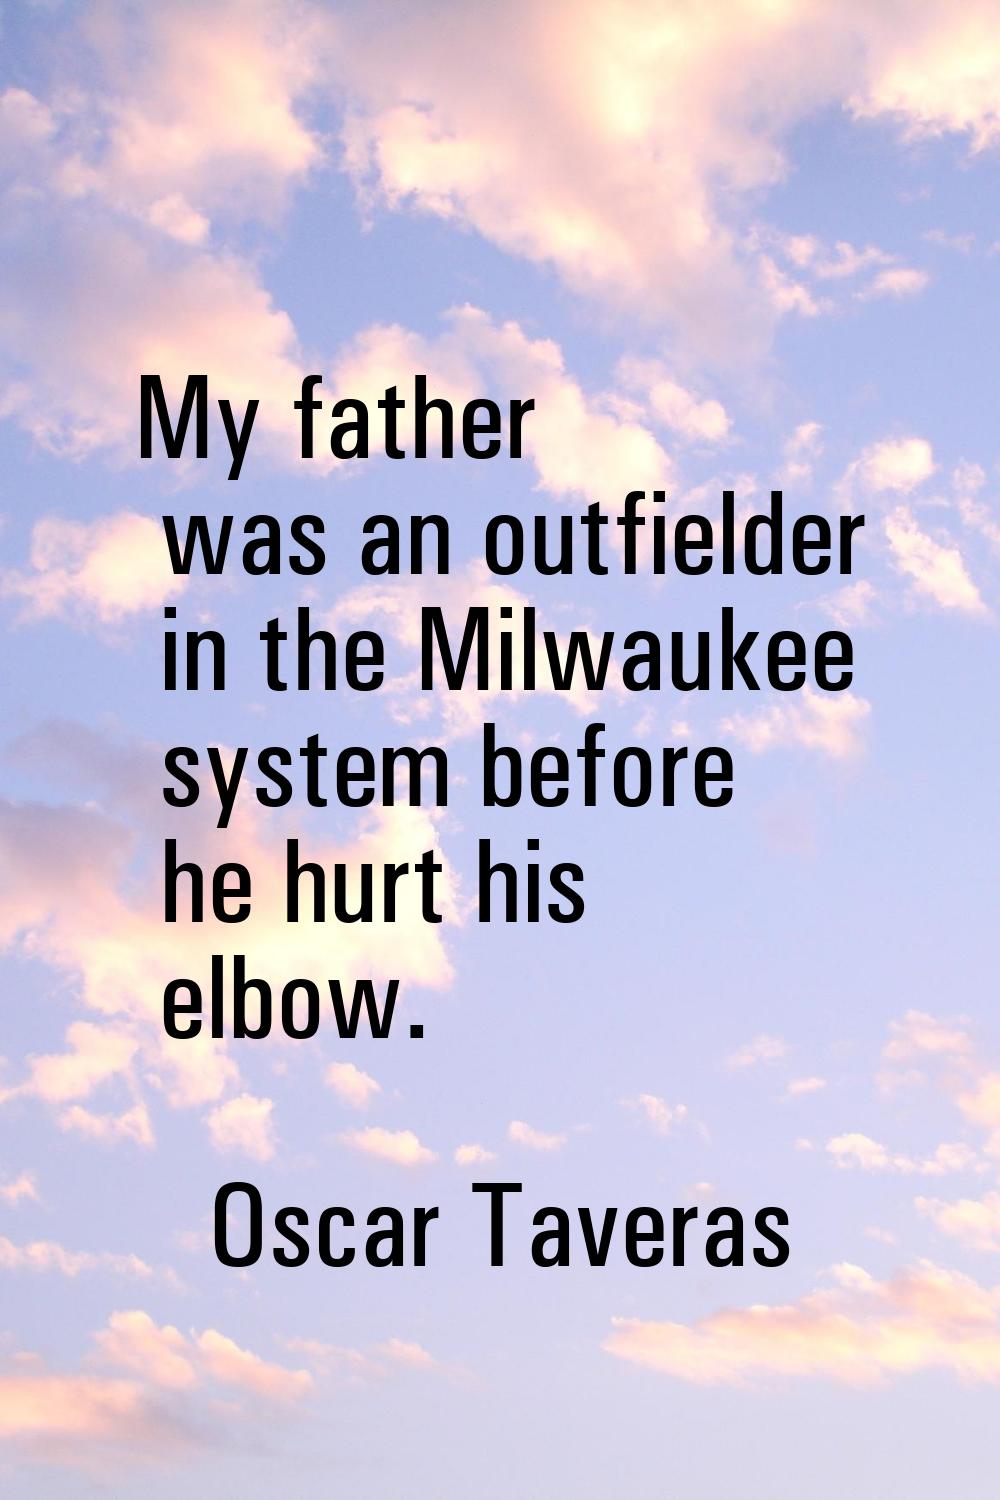 My father was an outfielder in the Milwaukee system before he hurt his elbow.